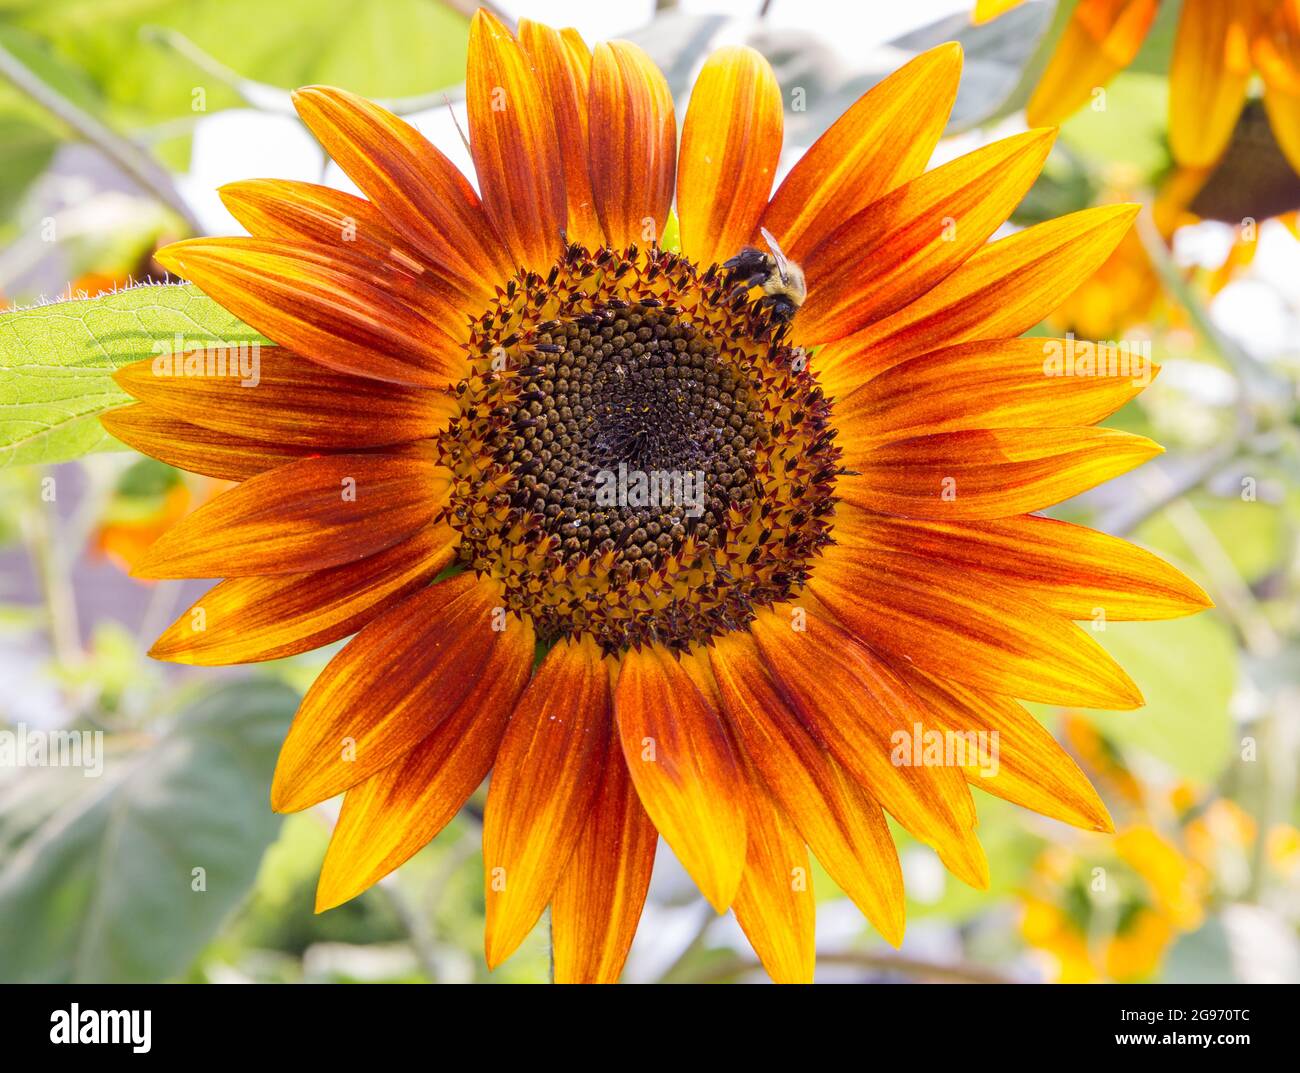 A large sunflower with orange petals hosts a common eastern bumble bee in bright sunshine. Stock Photo